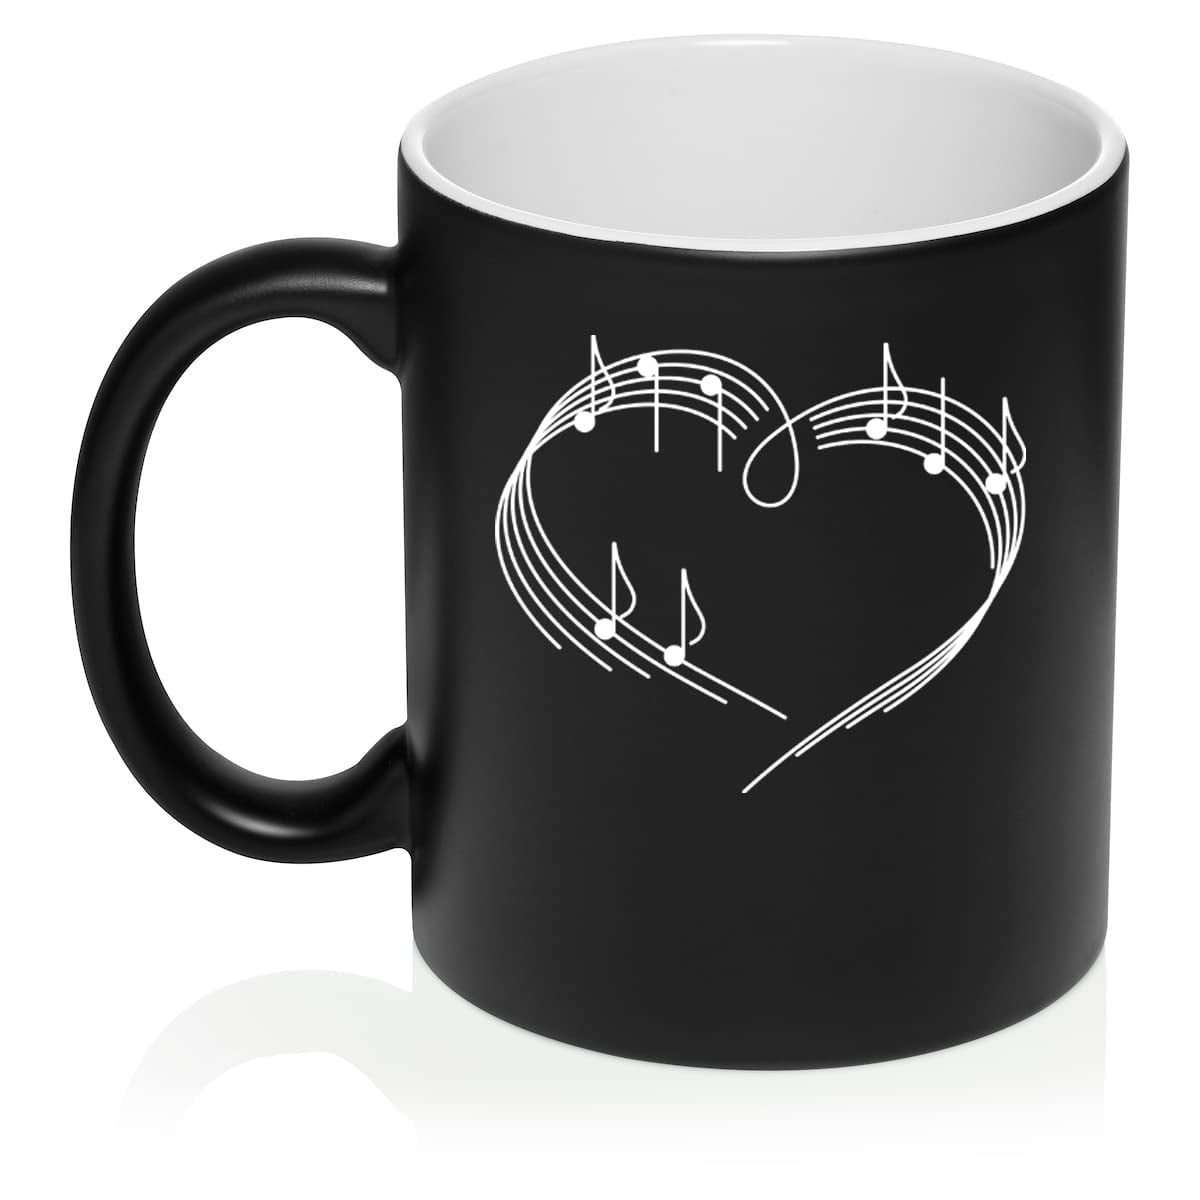 12.9 oz Unique 3D Handle Music Mug Musical Notes Design Coffee Cup Ceramic  Music Musical Notes Cup Gift for Women,Men,Friend